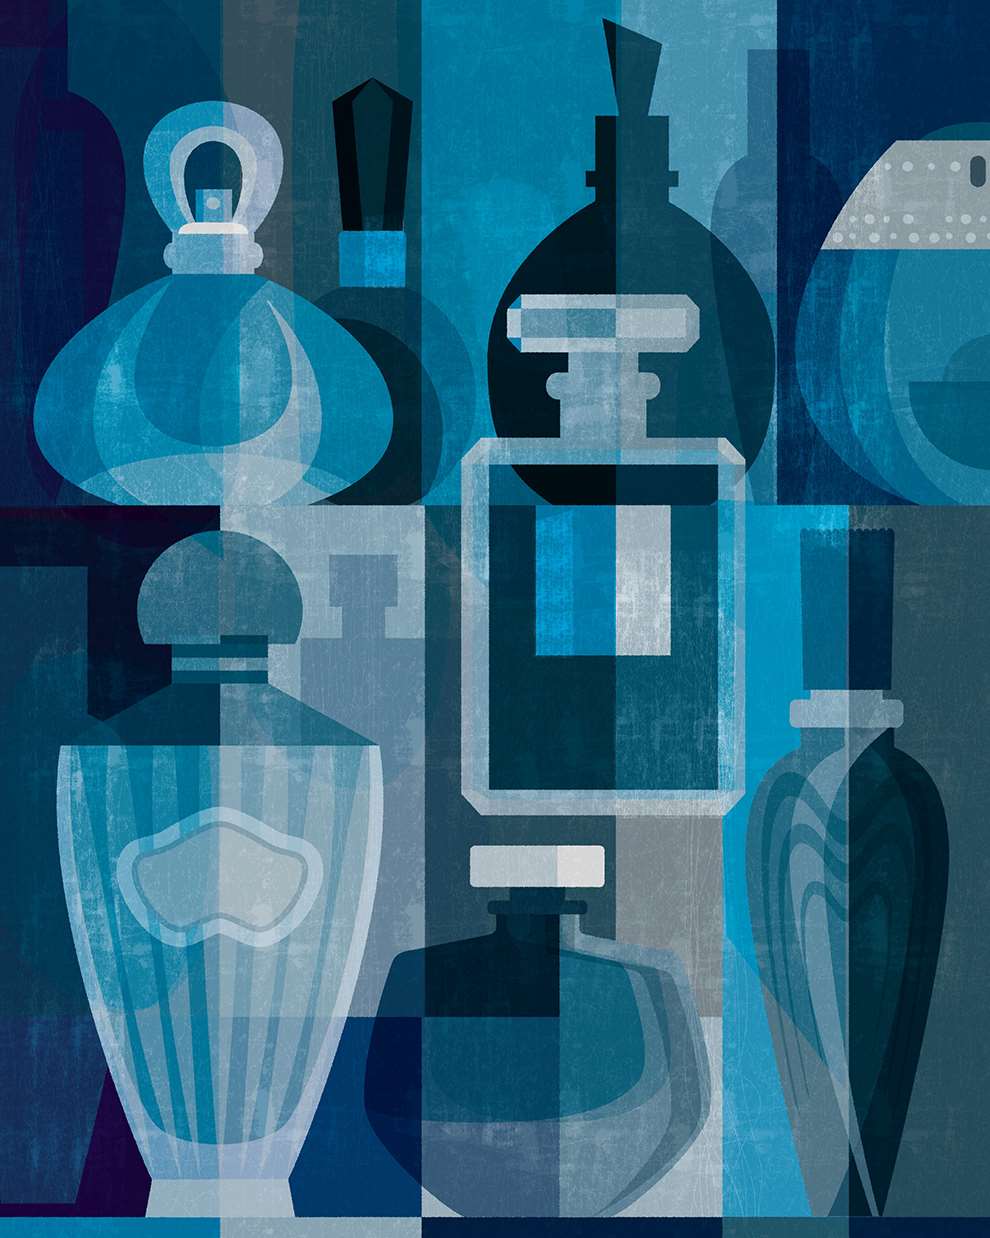 Paul Wearing, Perfumery illustration depicting a number of fragrance glass bottles, overlapping shapes and textures. 